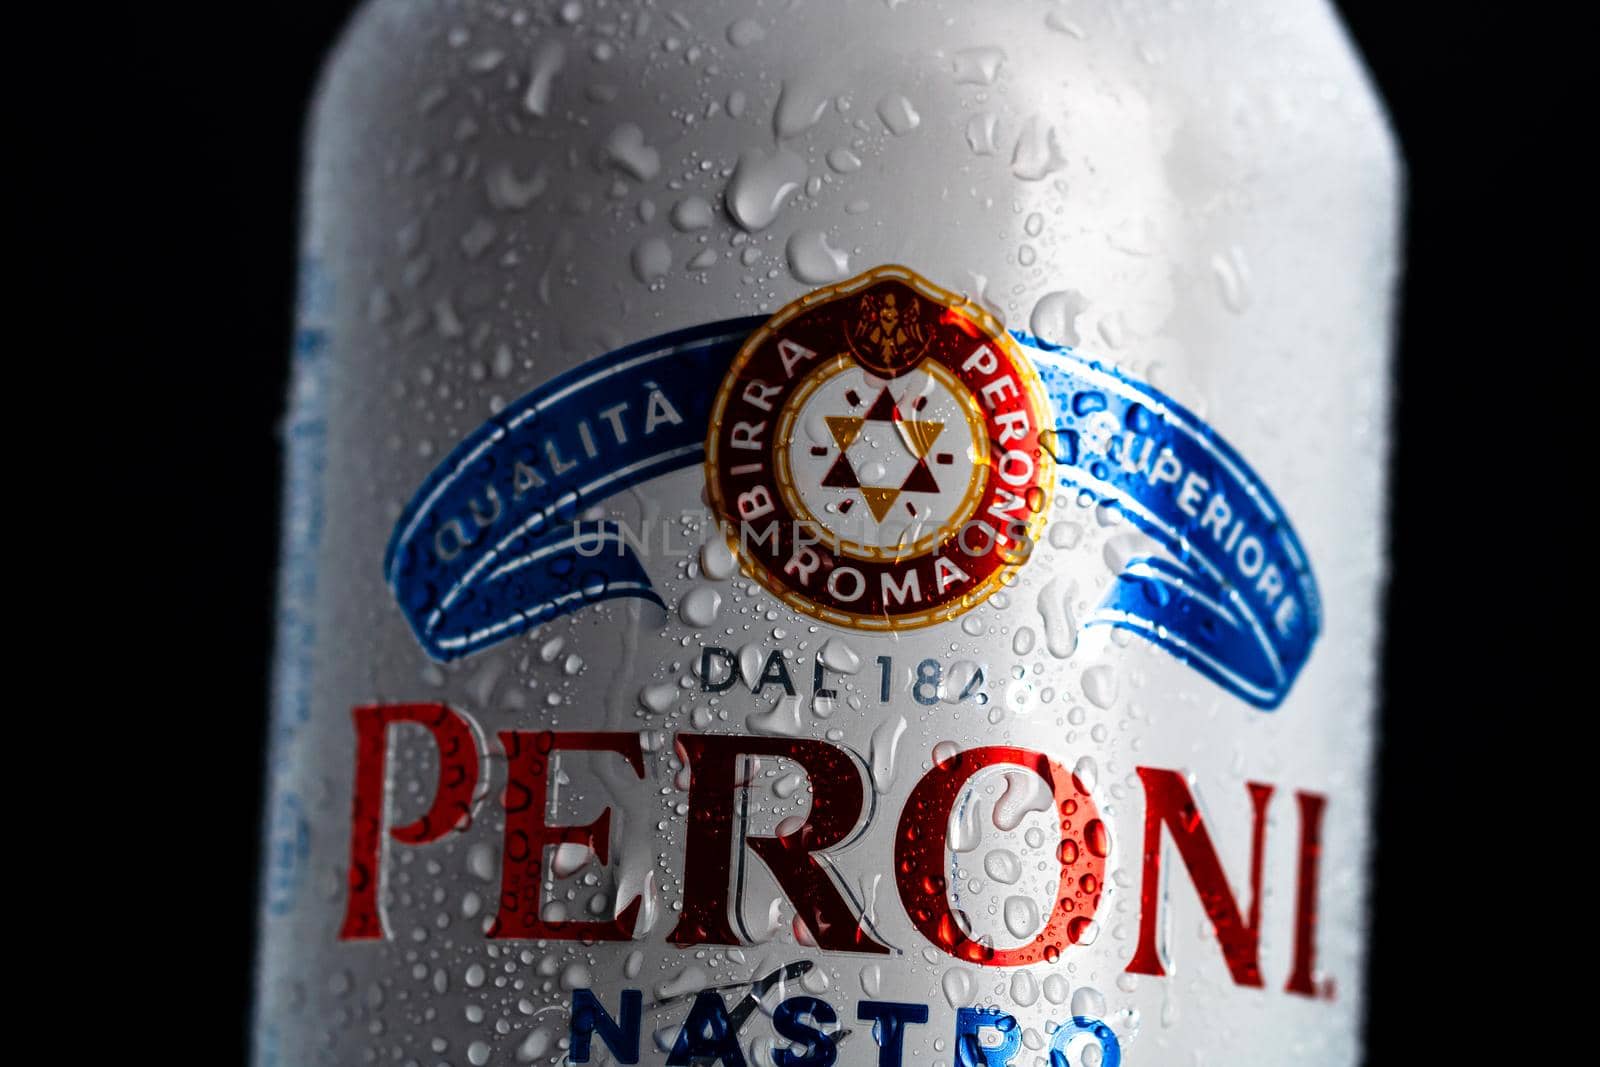 Detail of water droplets on Peroni Nastro Azzurro, a premium lager beer. Studio photo shoot in Bucharest, Romania, 2021